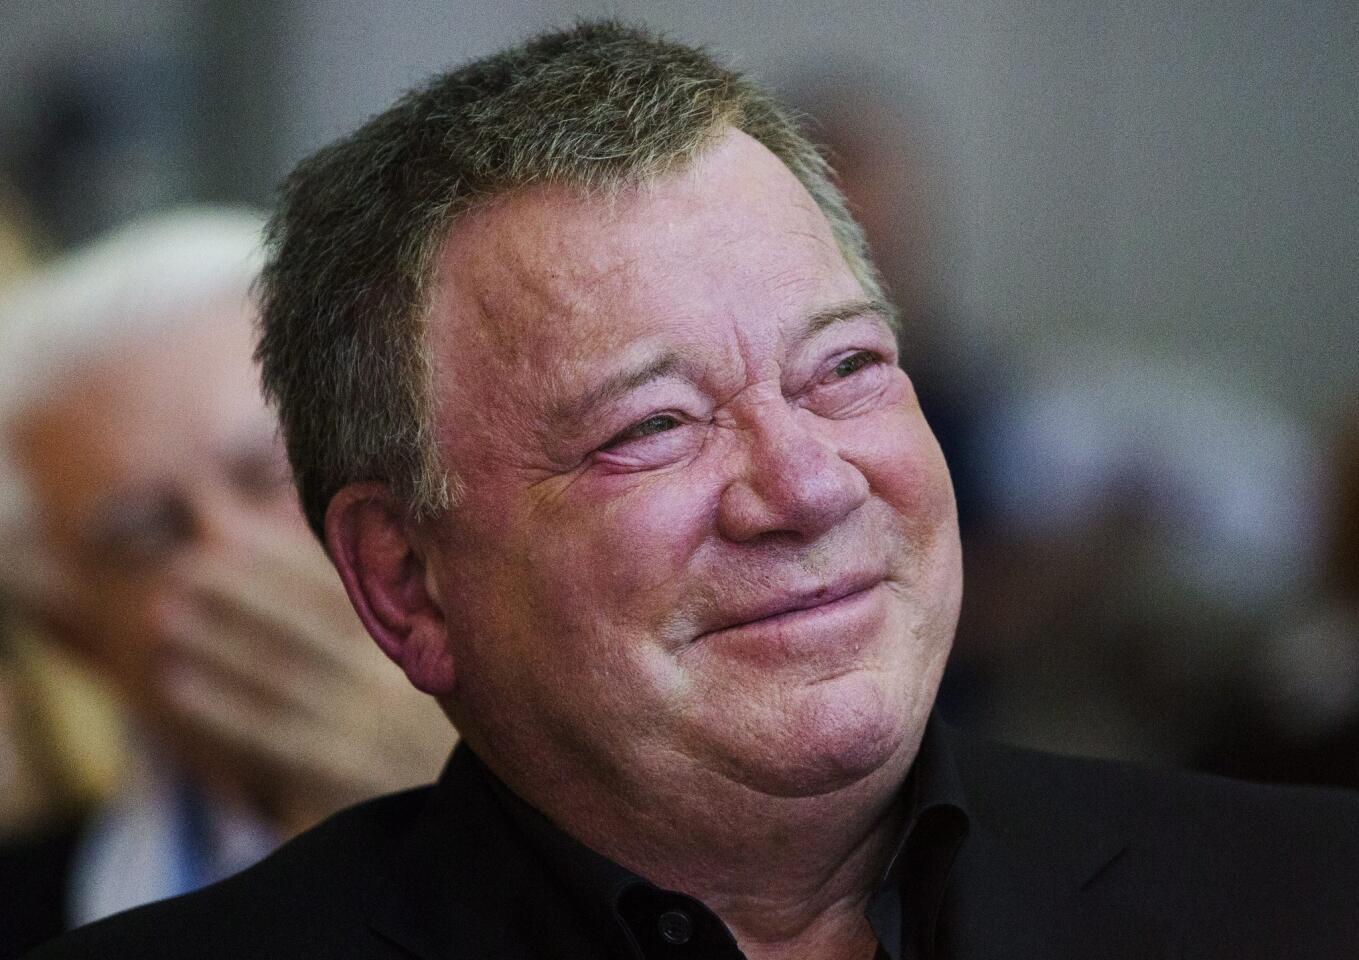 "I hope the great work started by Nelson Mandela continues to spread across the world. He will be remembered as an icon for equality." — @WilliamShatner